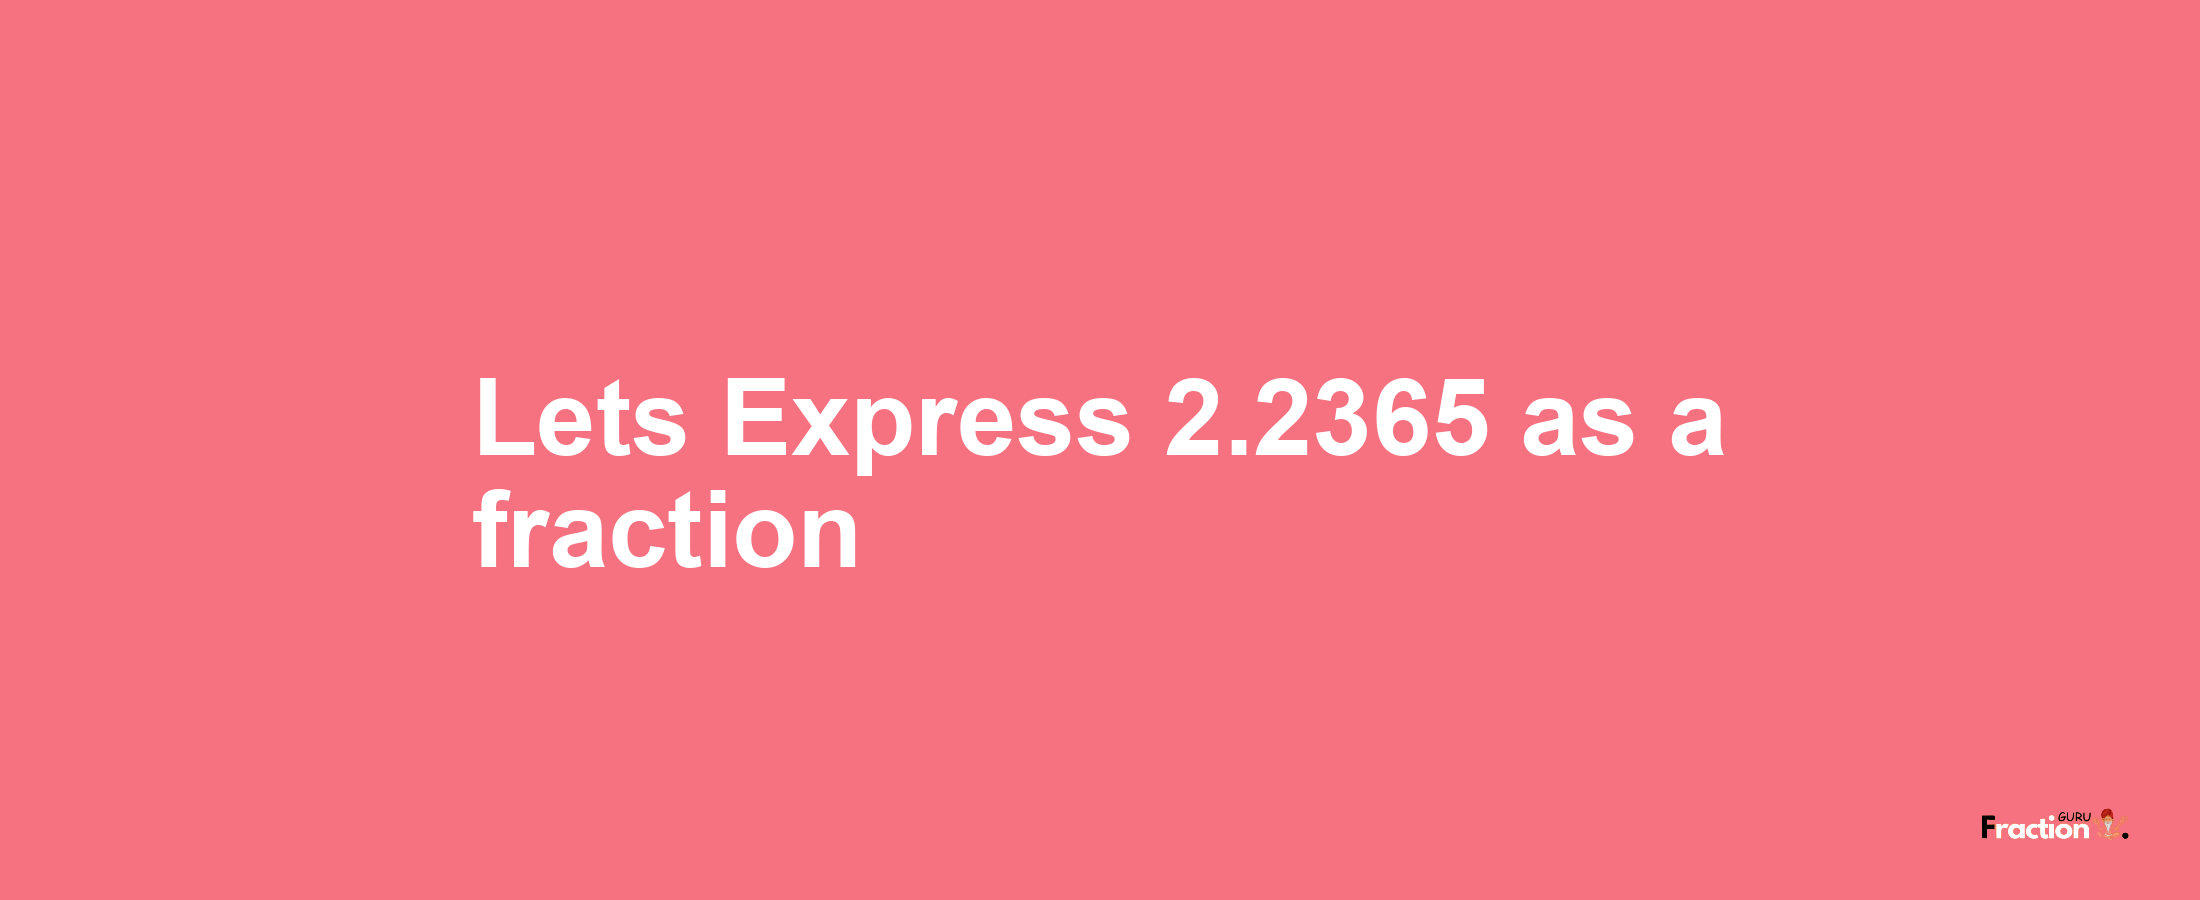 Lets Express 2.2365 as afraction